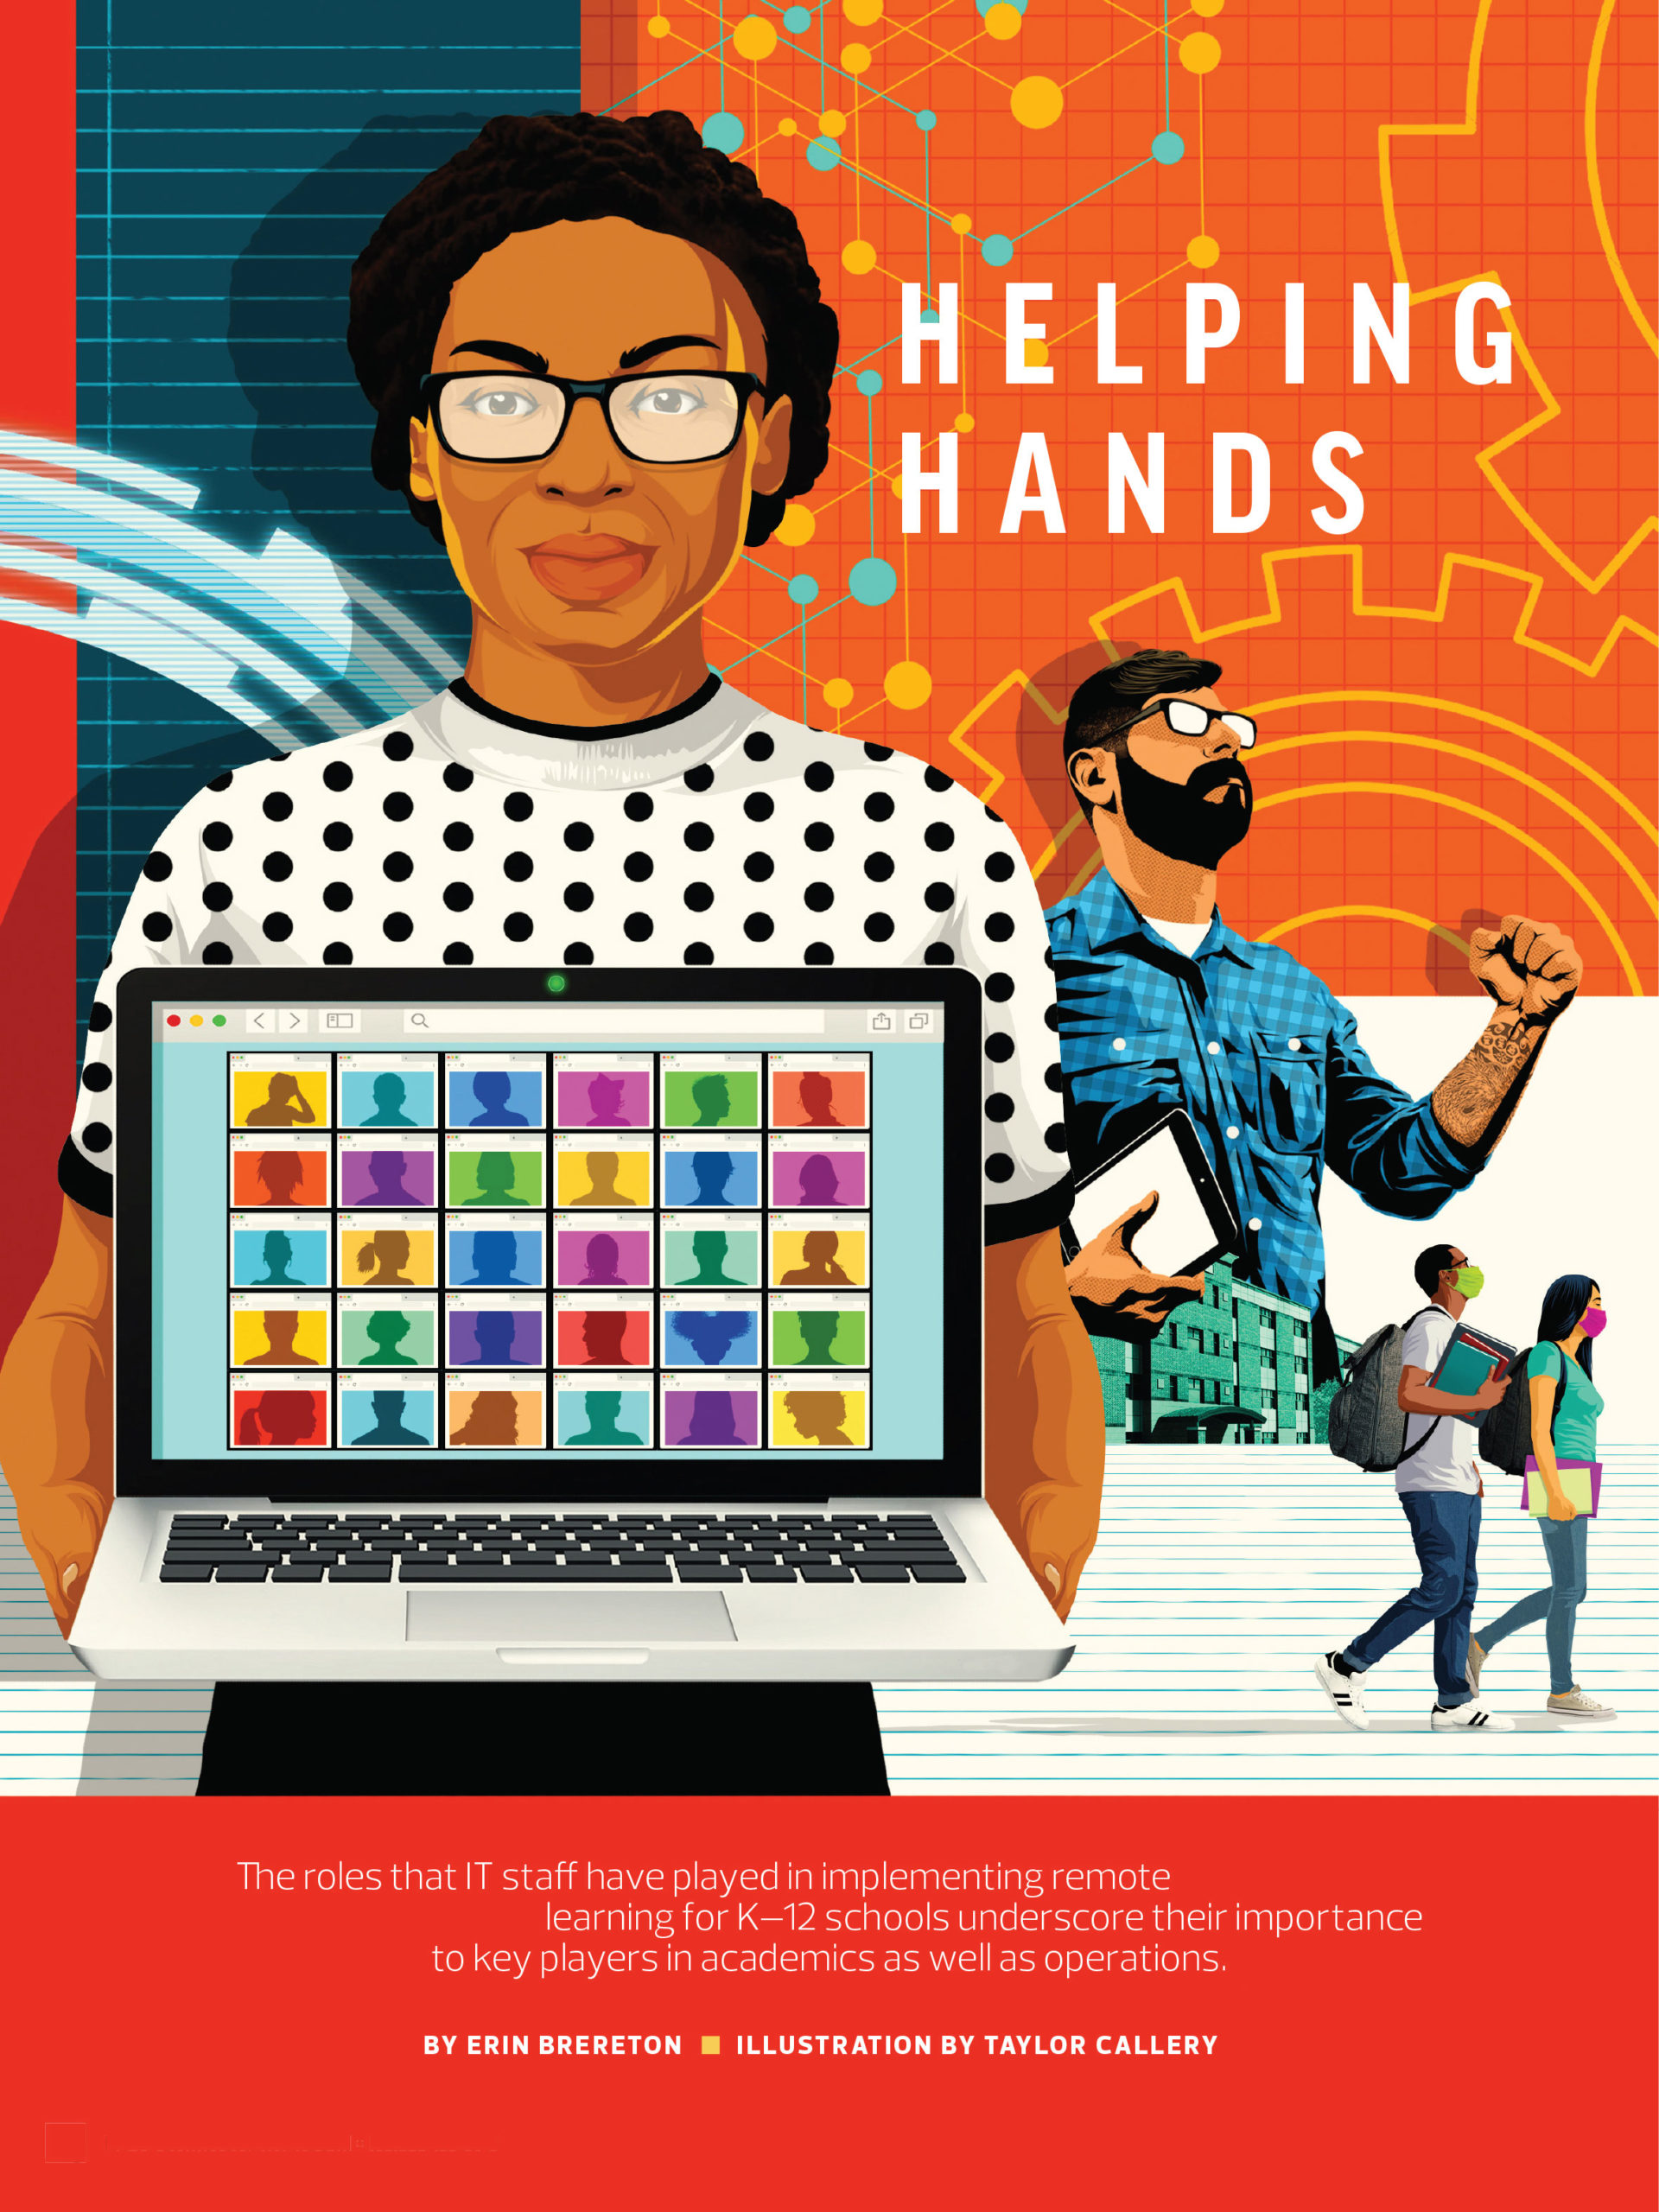 Taylor Callery illustration for EdTech Magazine